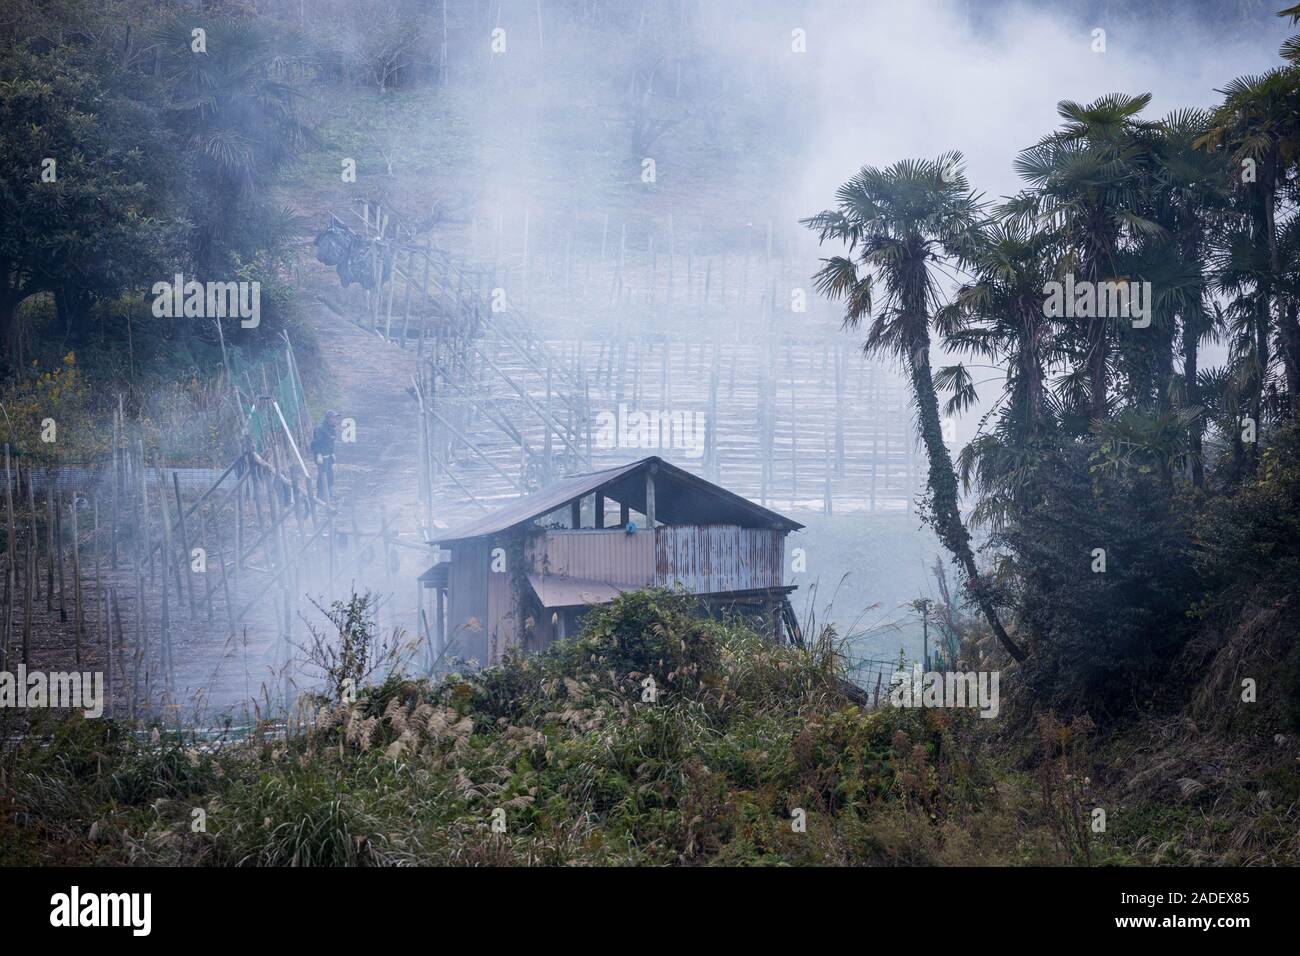 Wooden shack engulfed in billowing smoke from controlled burn on rural farm Stock Photo